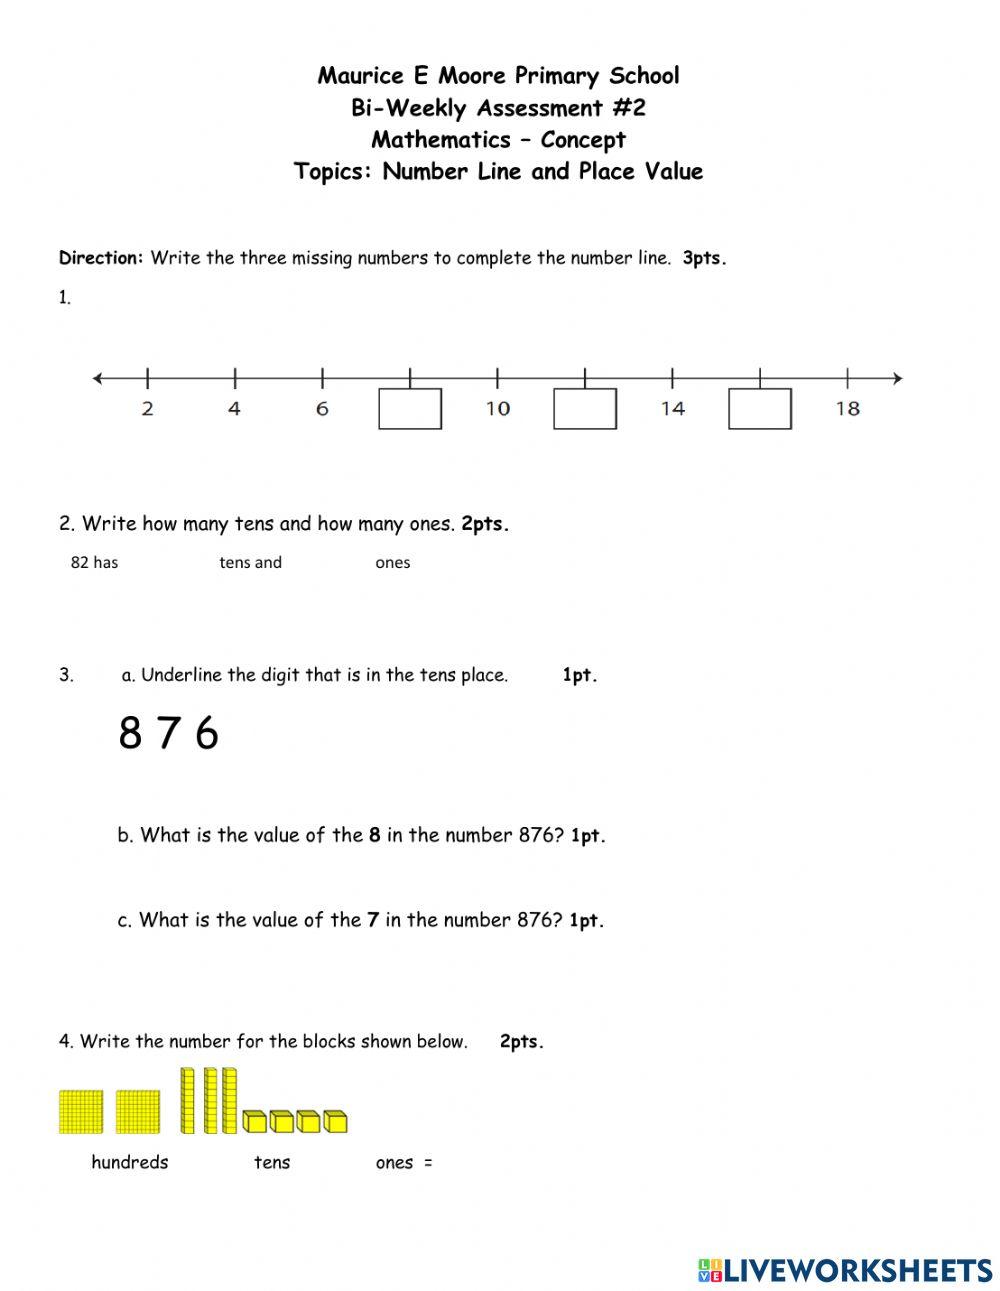 Number Line and Place Value